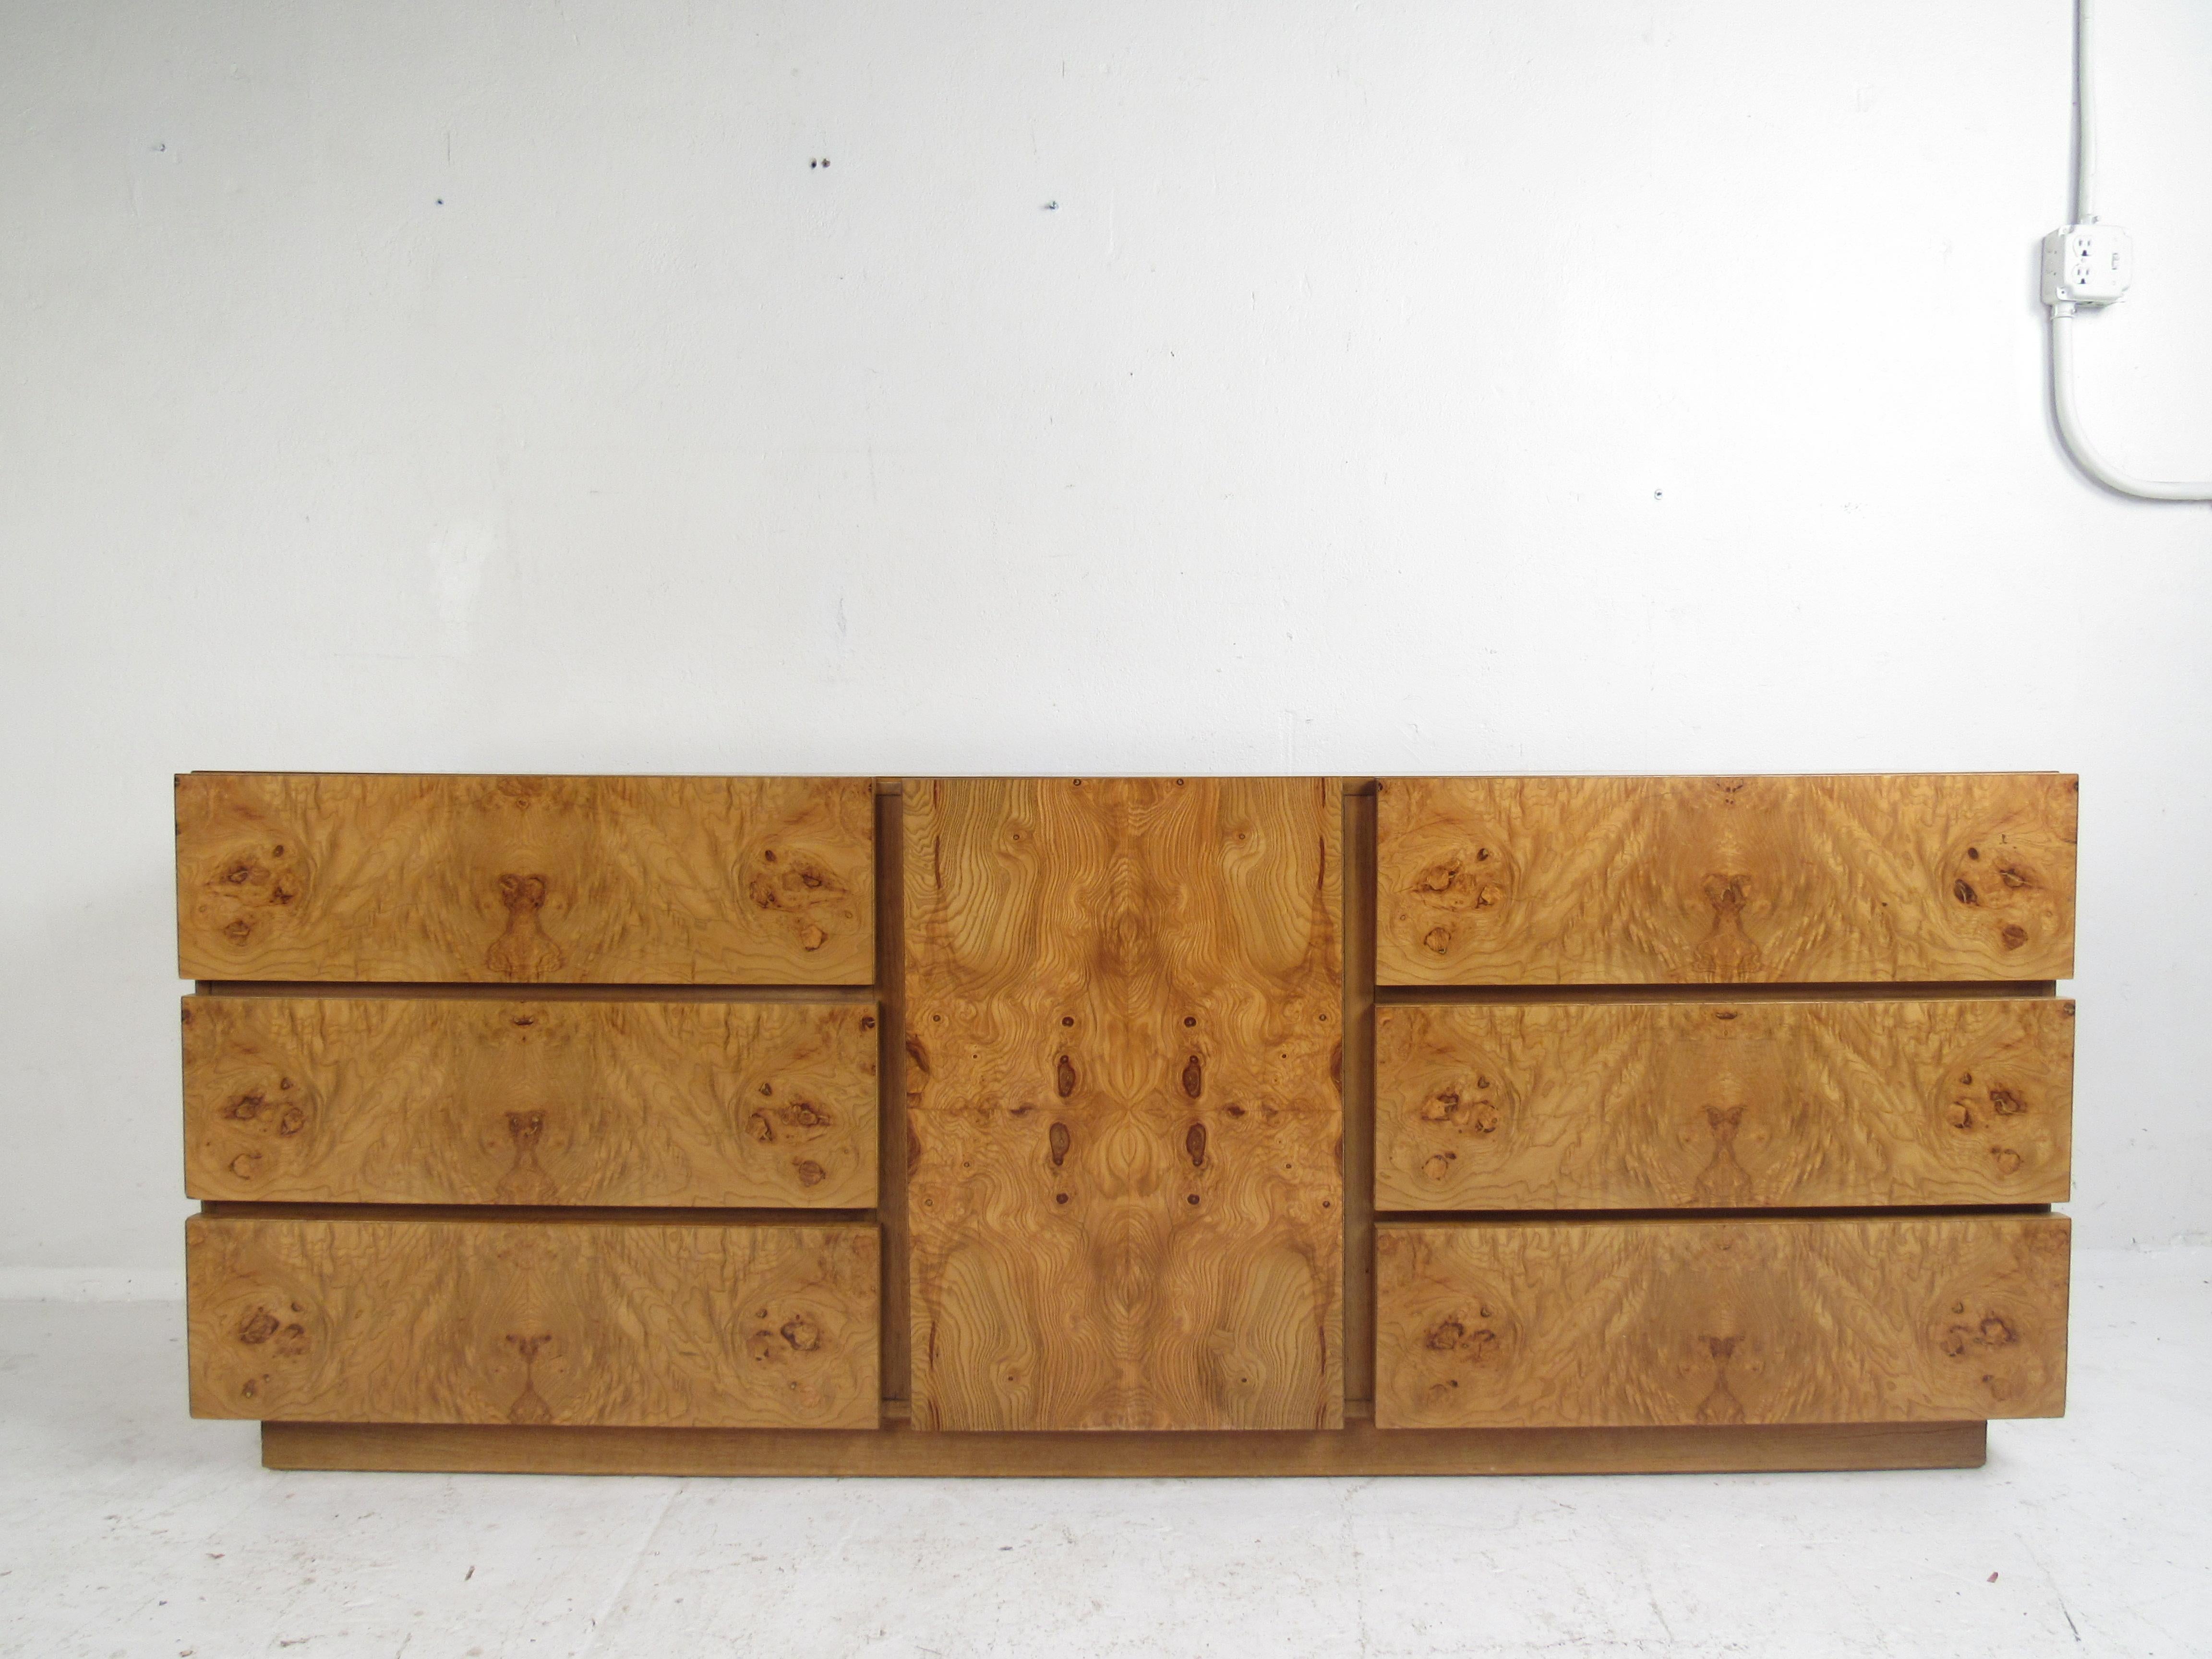 This impressive vintage modern bedroom set includes a highboy dresser and a low dresser. Well-made case pieces with straight lines and elegant burl wood grain throughout. A gently used set that has a large wardrobe/armoire with a storage compartment